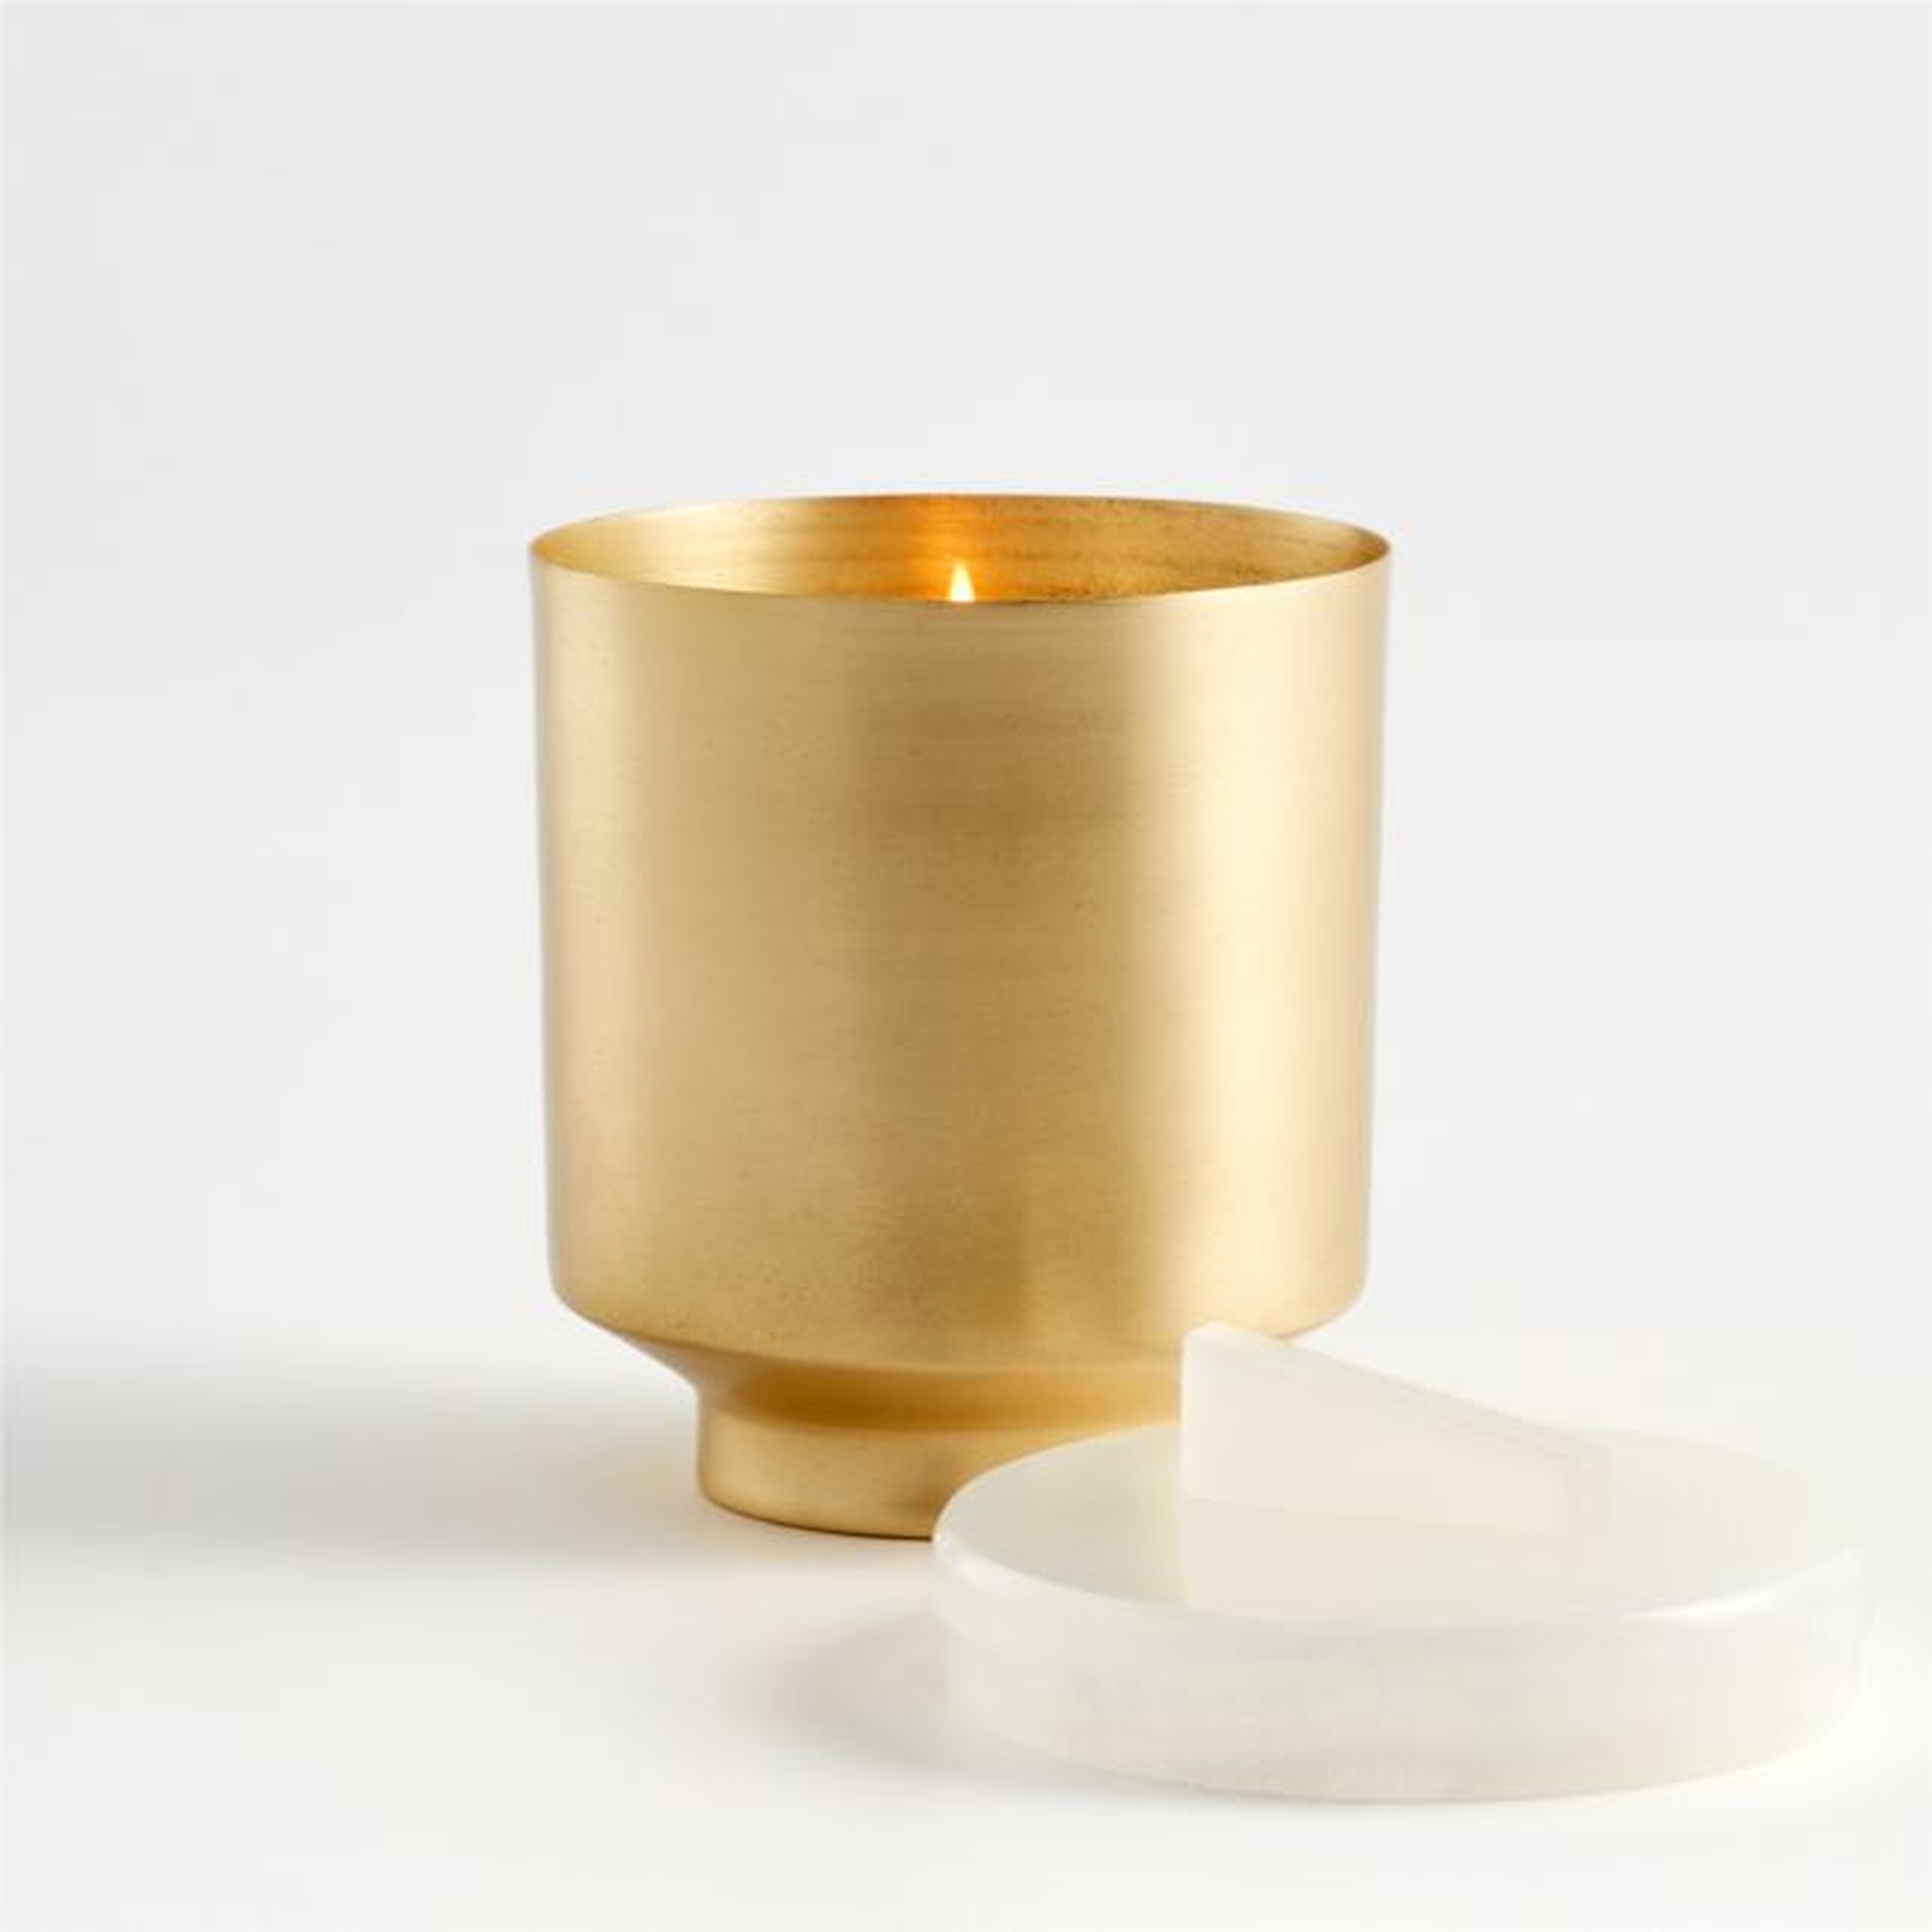 Lavender Brass Candle with Onyx Lid - Crate and Barrel